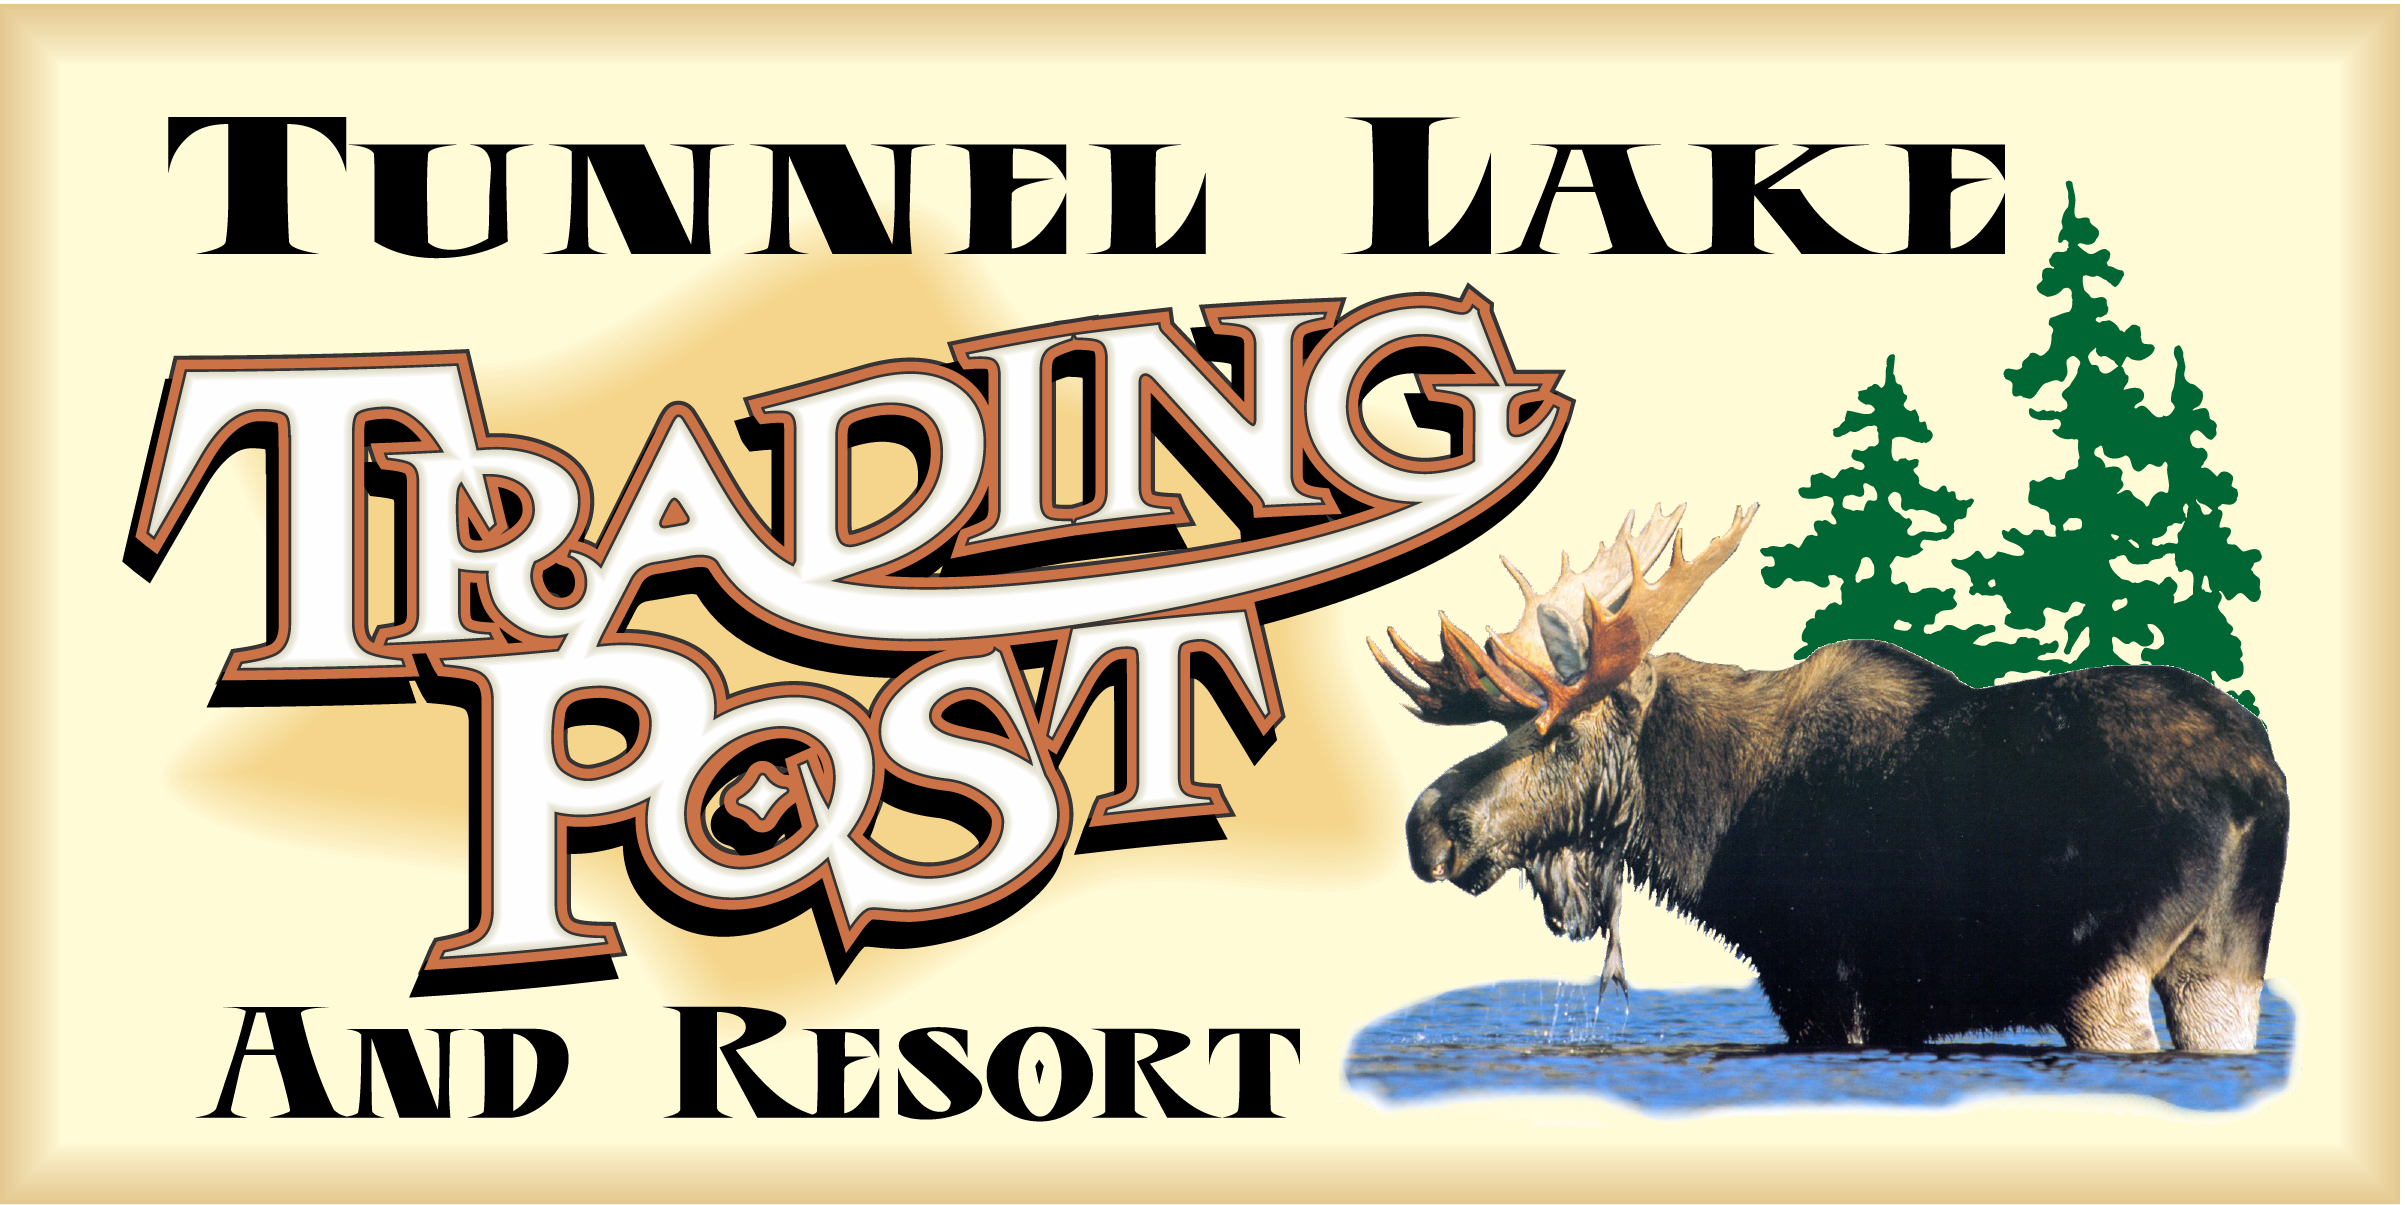 tunnel-lake-trading-post-sign-logo-vector.png